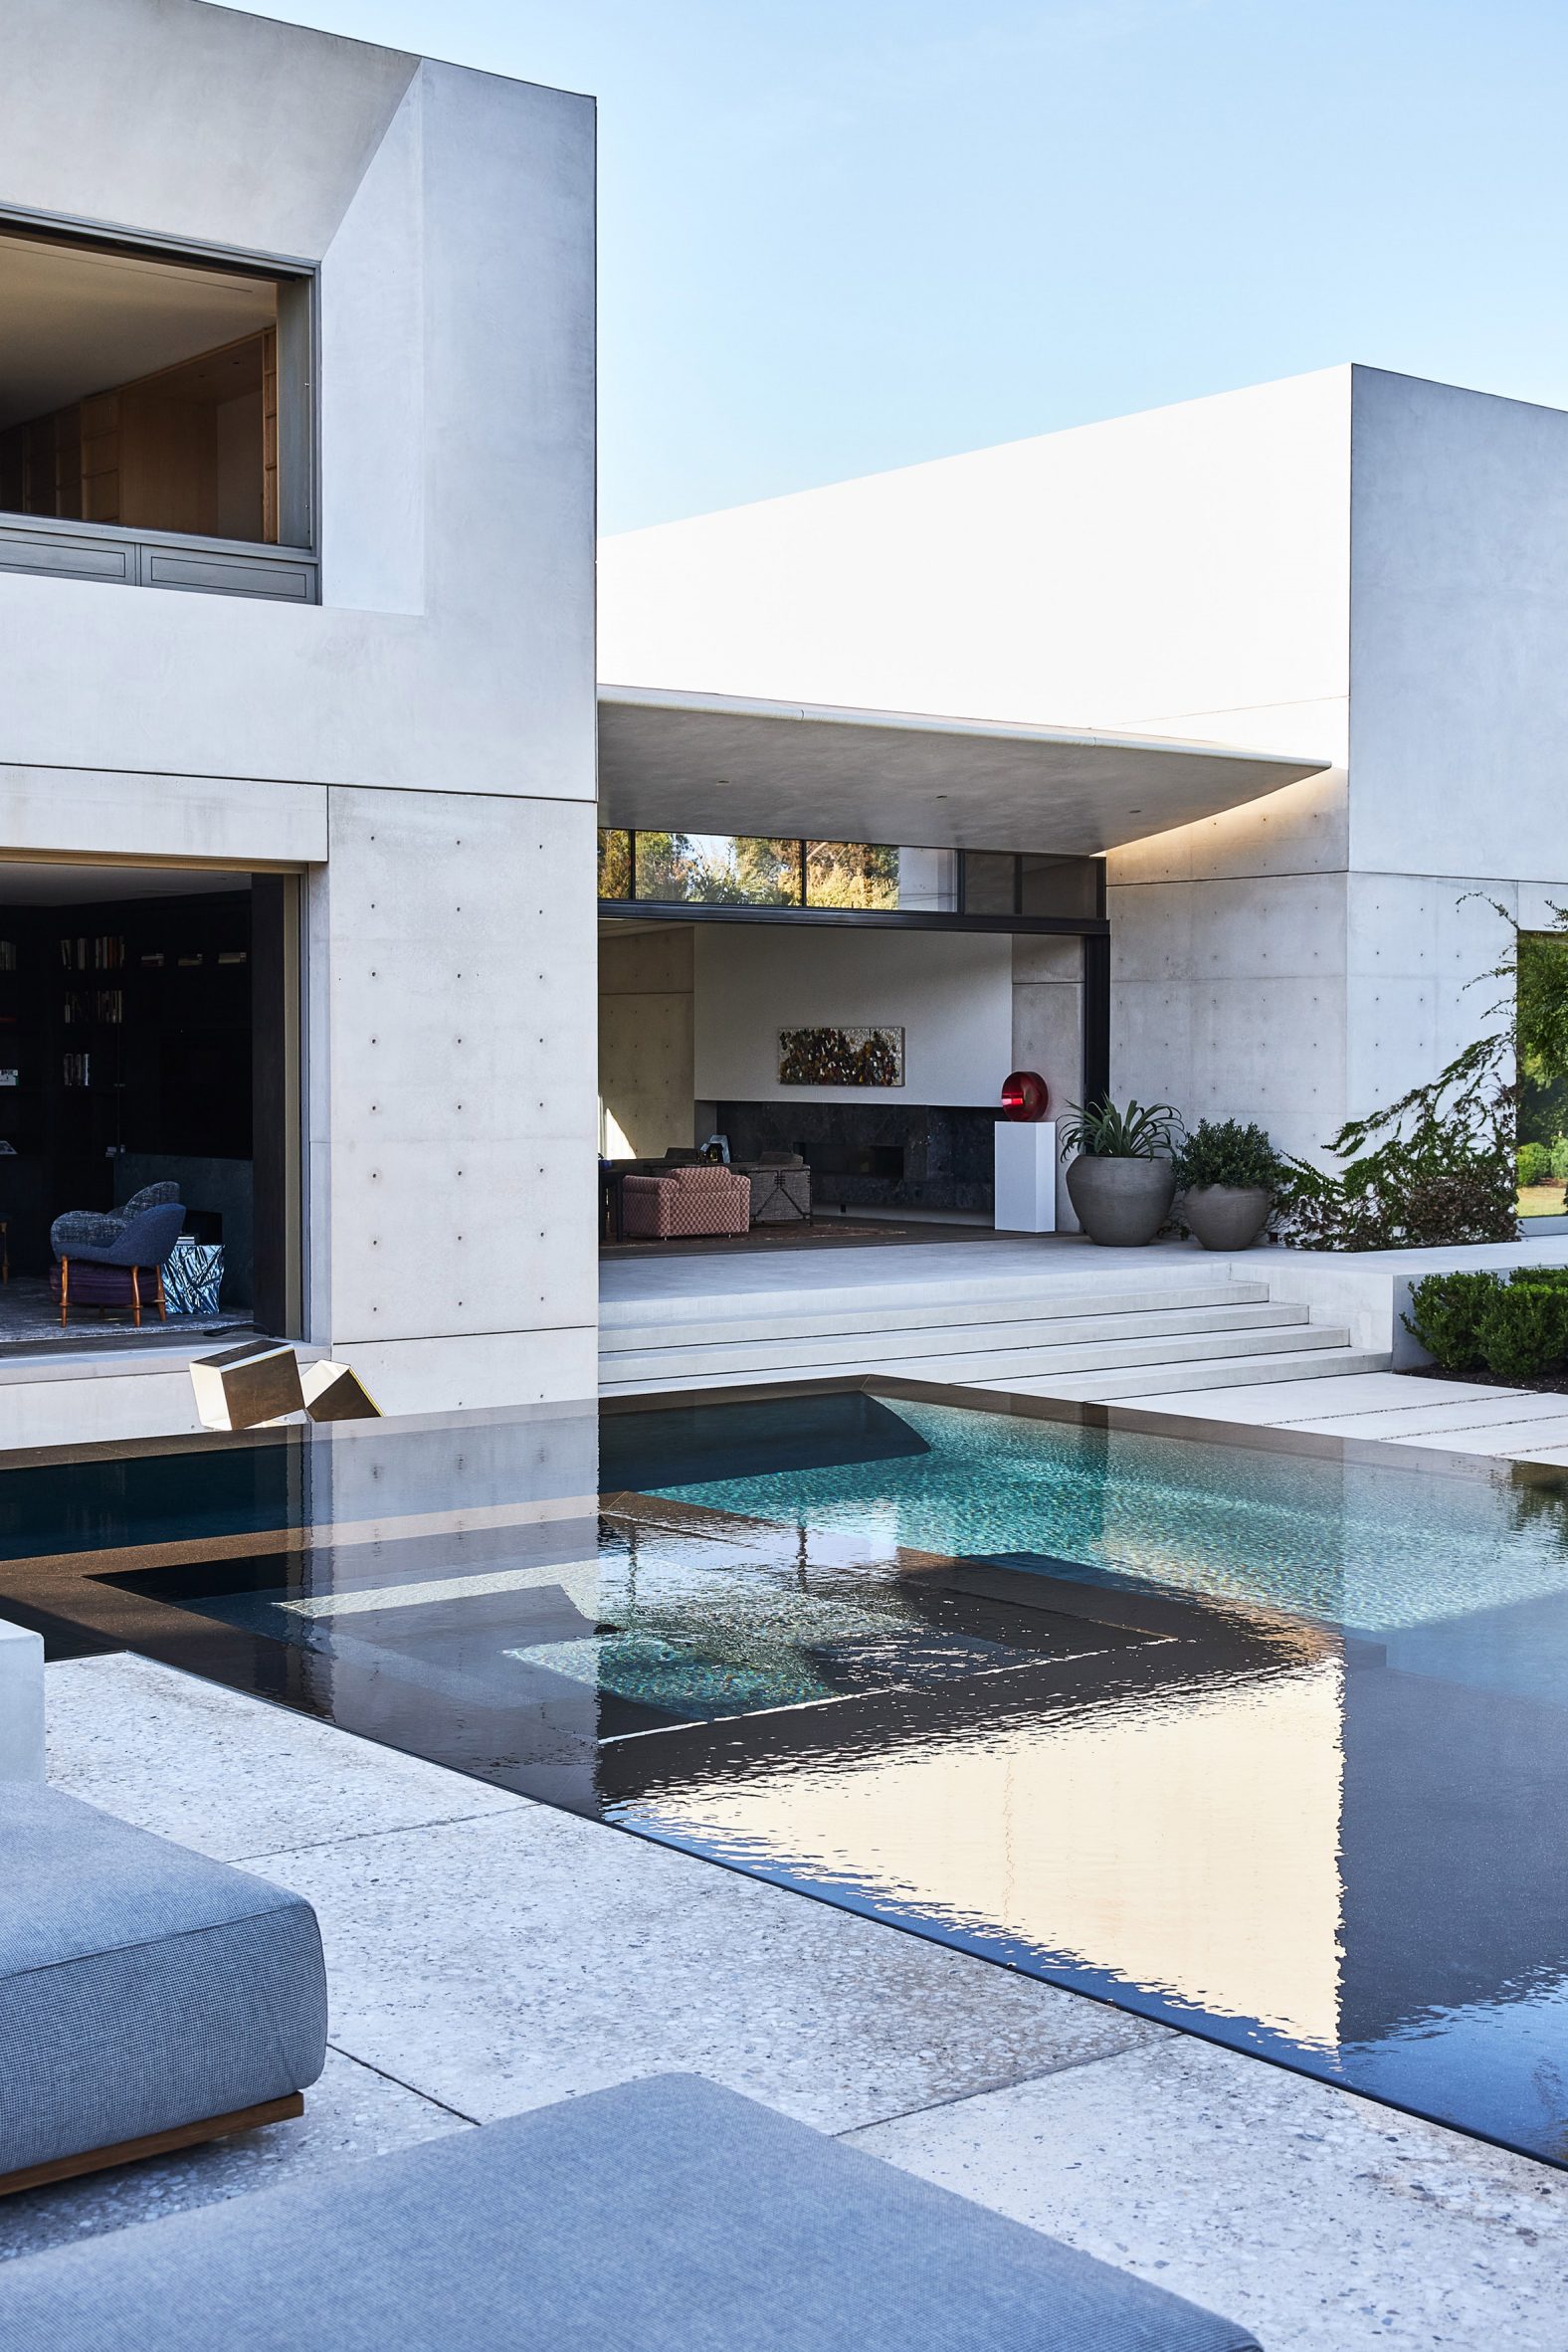 White concrete house with varied volumes and swimming pool